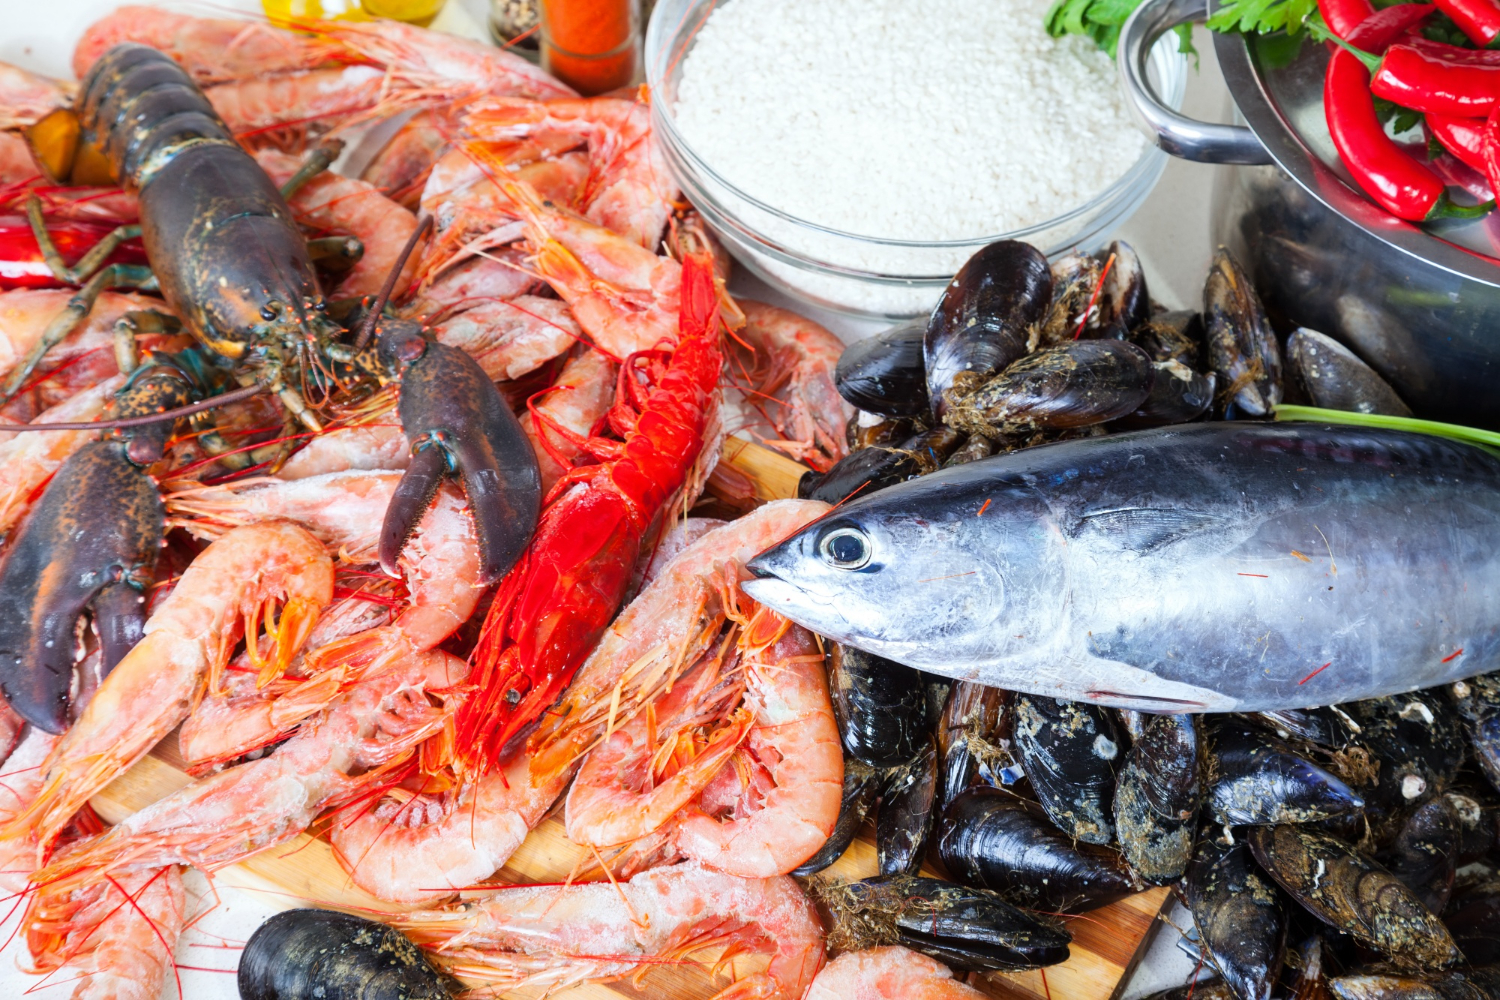 India Aims to Double Seafood Exports in Two Years, Debunking Safety Concerns